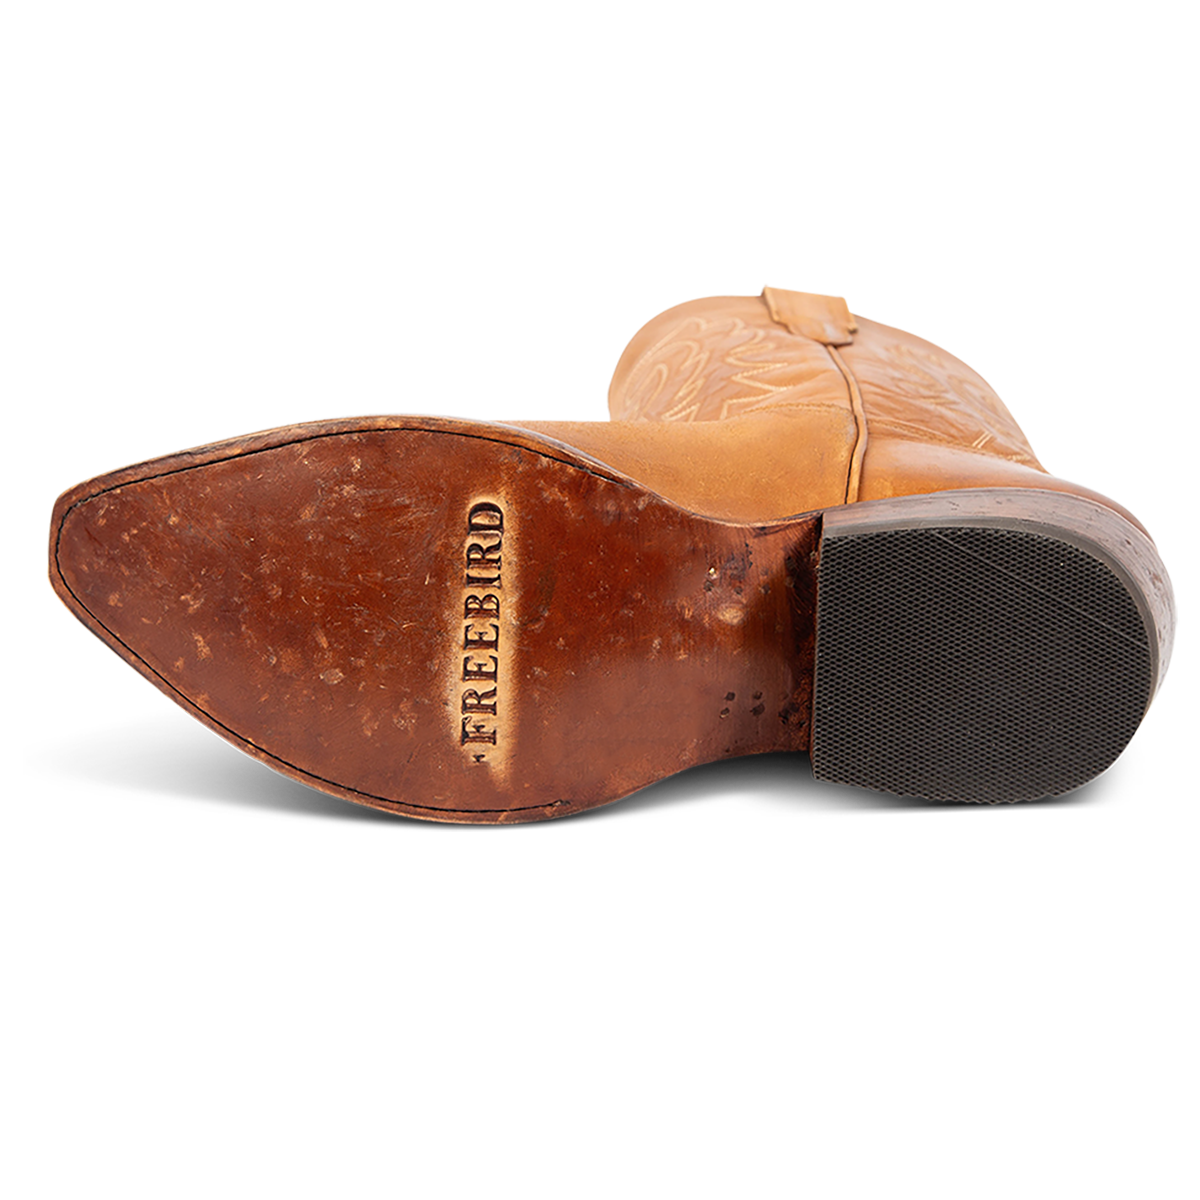 Leather sole imprinted with FREEBIRD on men's Marshall whiskey leather western cowboy boot